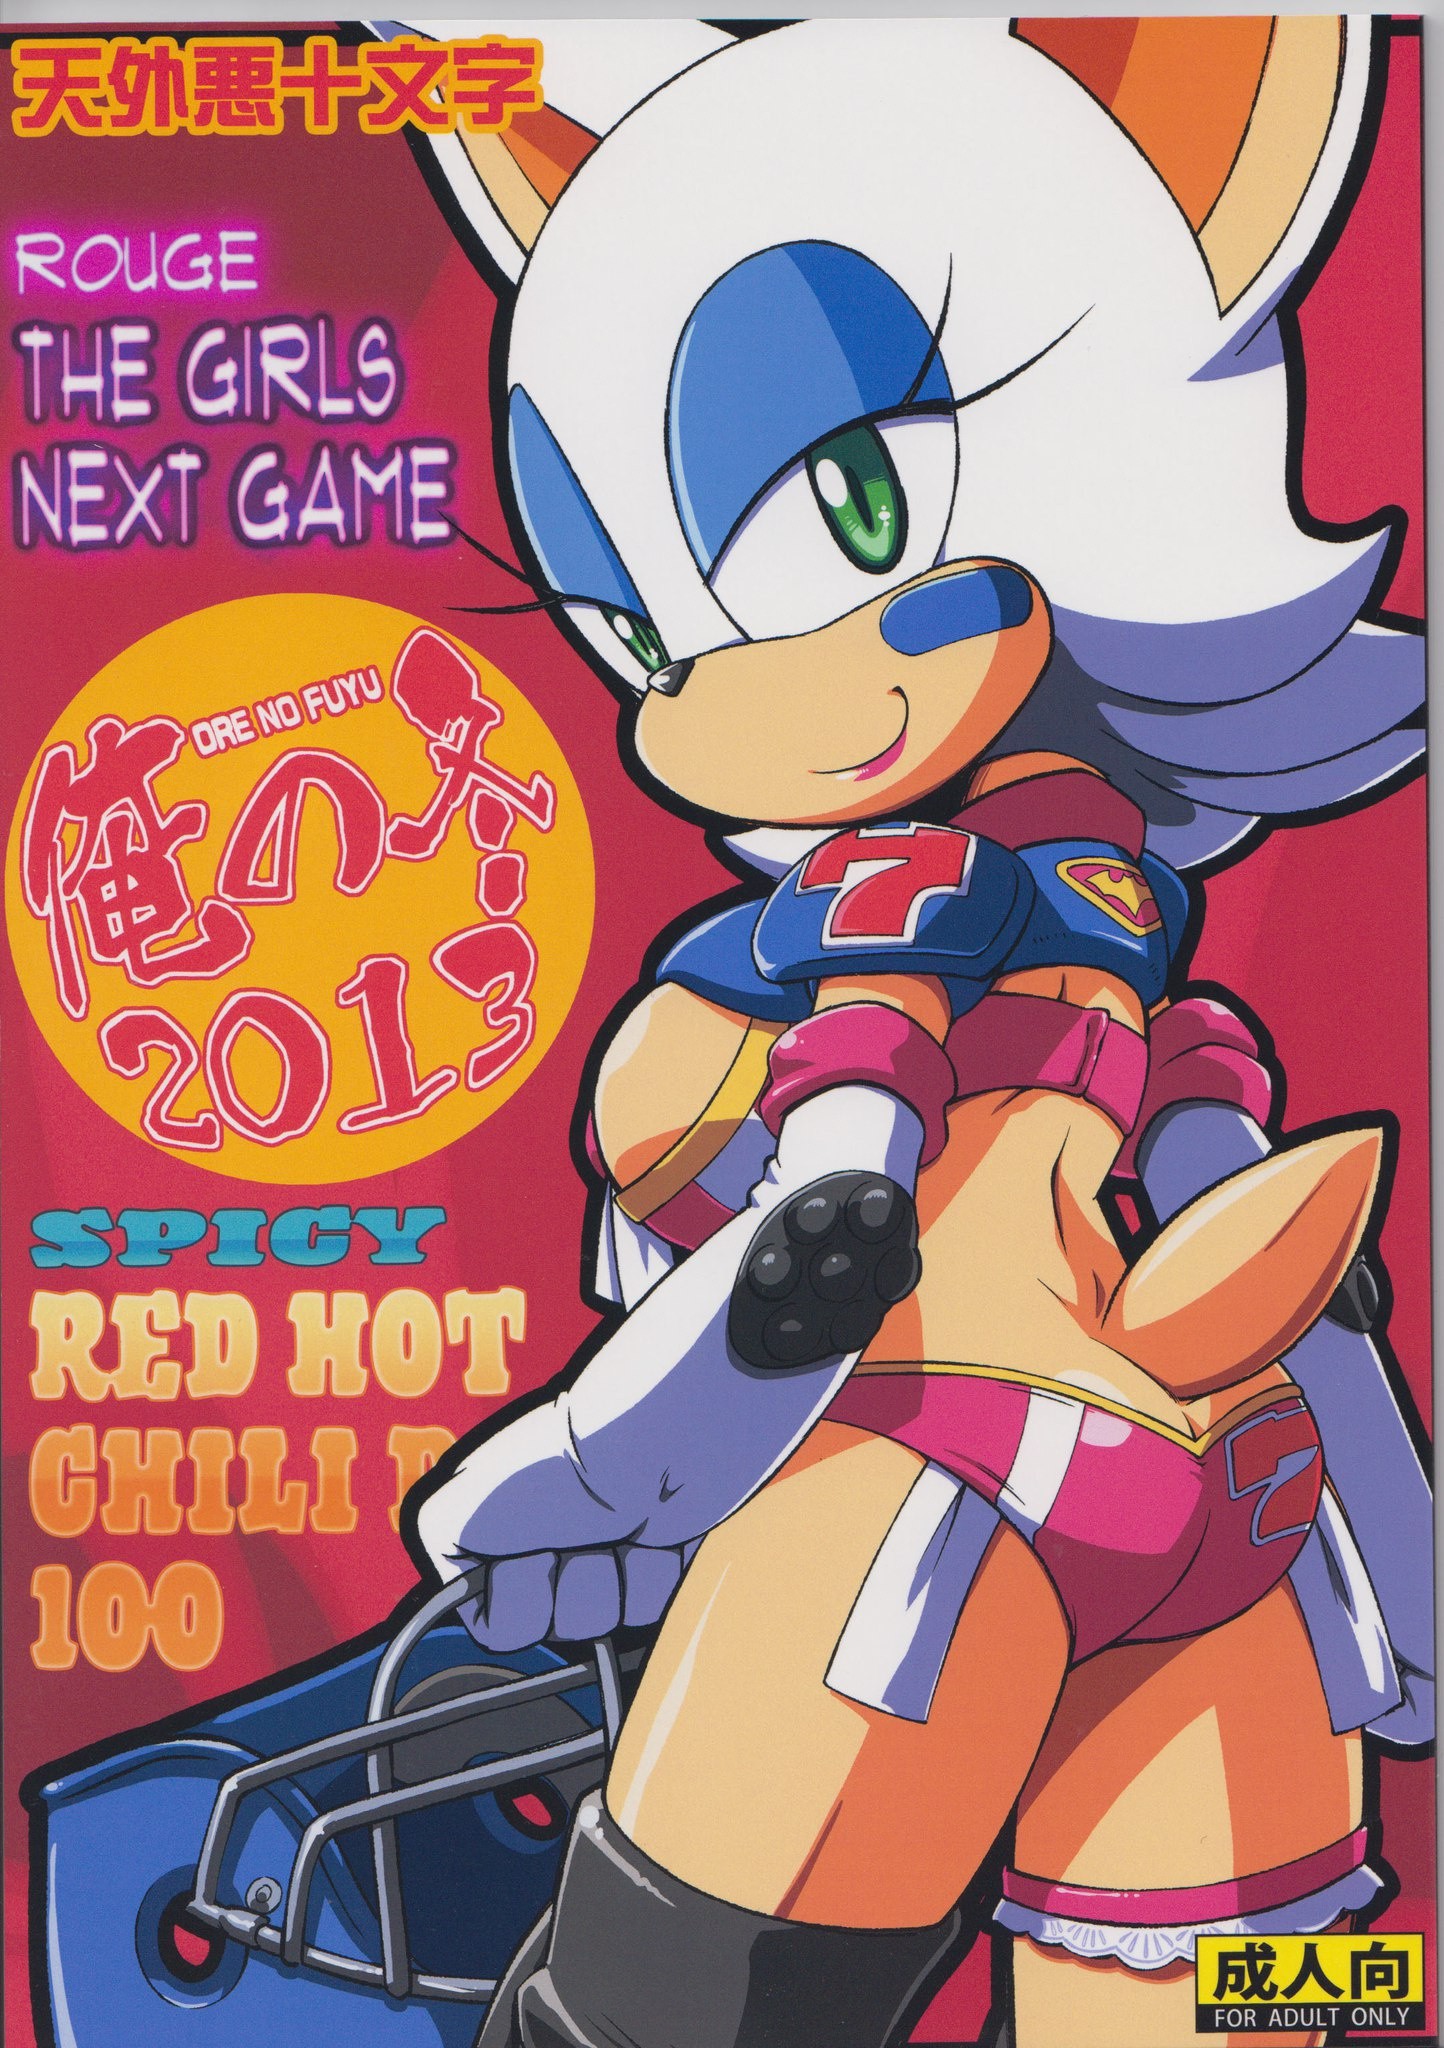 Rouge The girl next game hentai manga picture 1